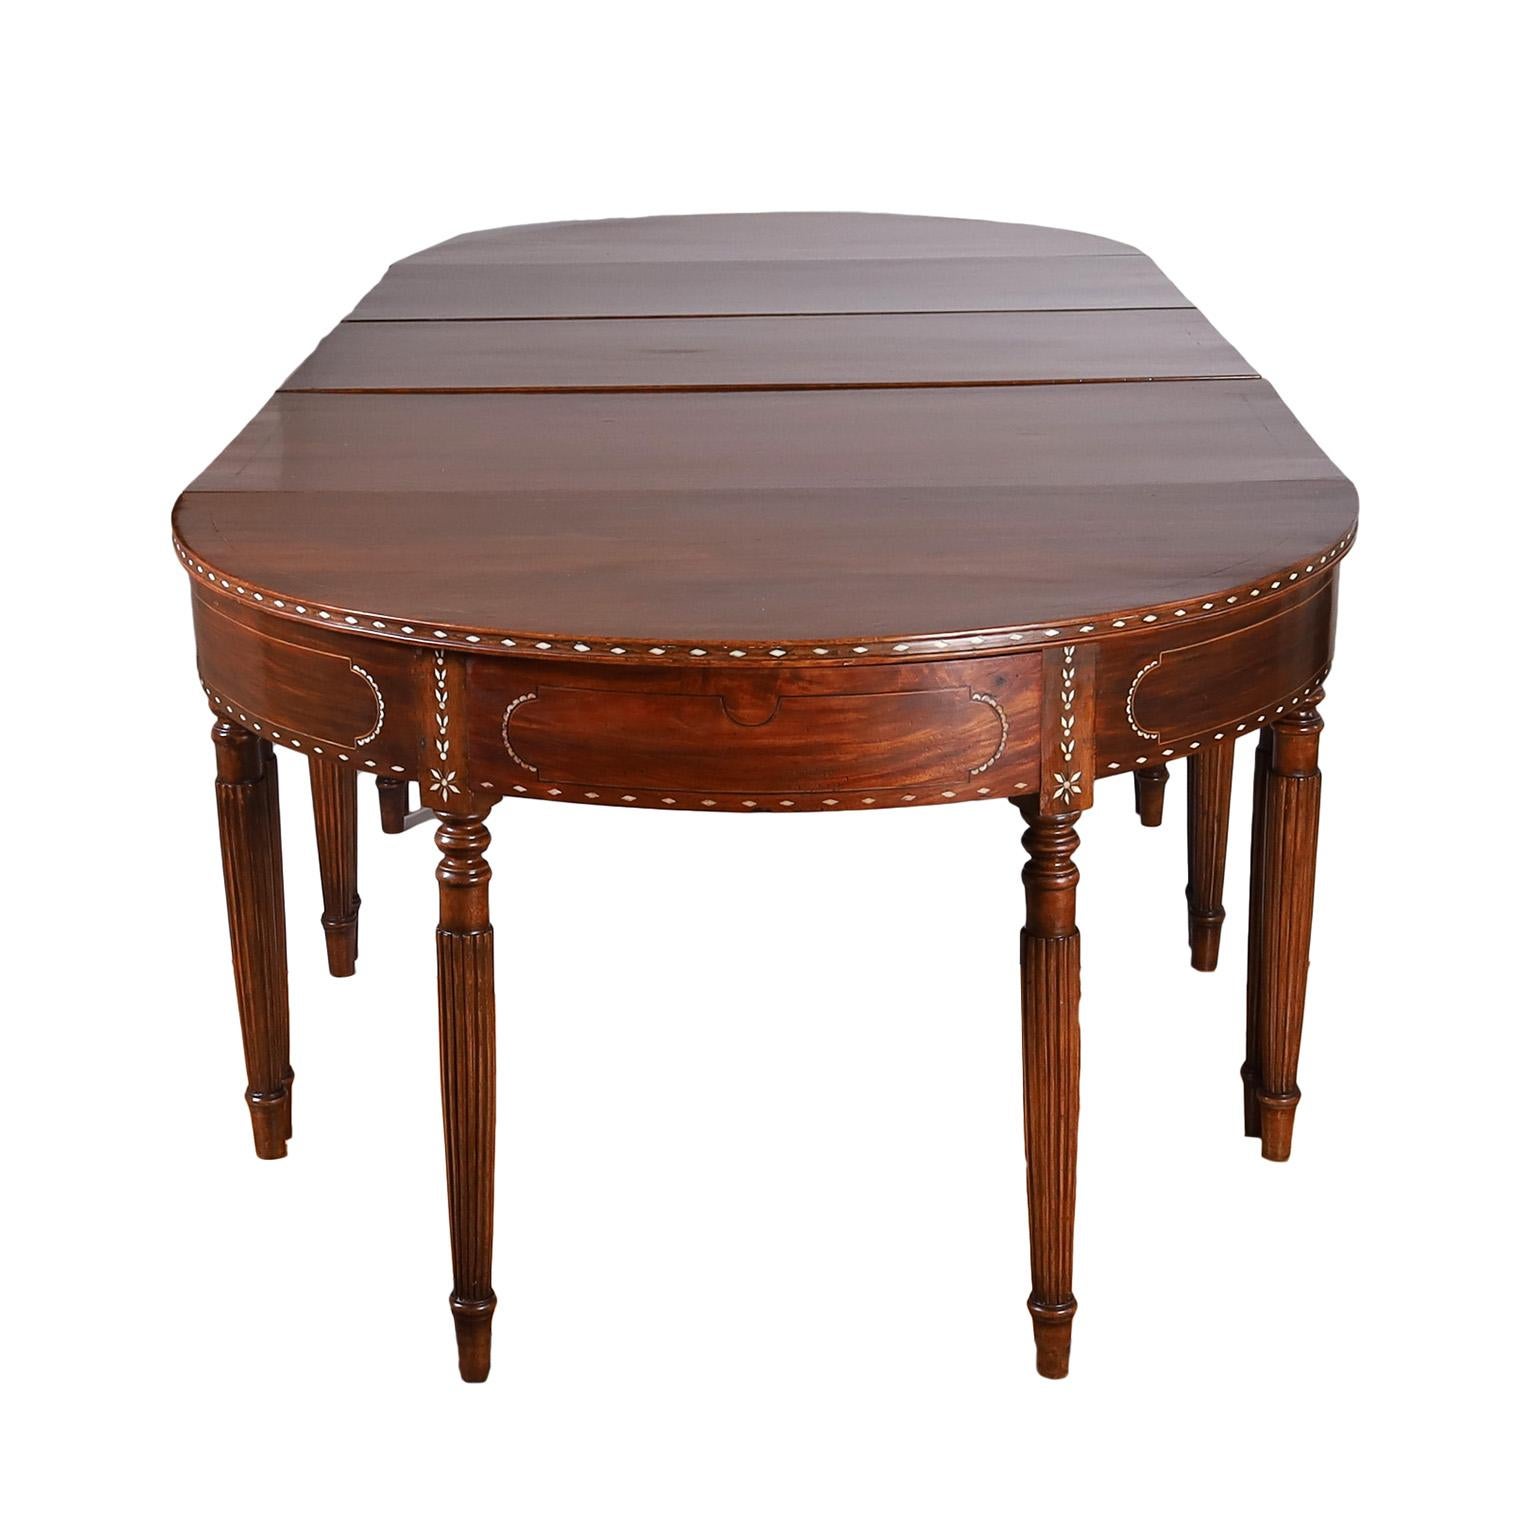 Rare and unusual antique Anglo Indian style dining table composed of five pieces of furniture crafted in mahogany with floral bone inlays and turned & beaded legs. All five pieces can be used separately or together in any combination. Often mistaken